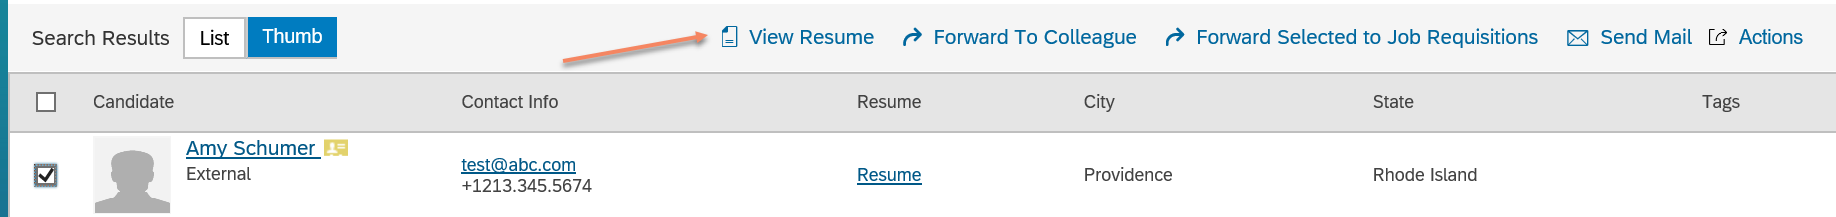 From Candidate search.png